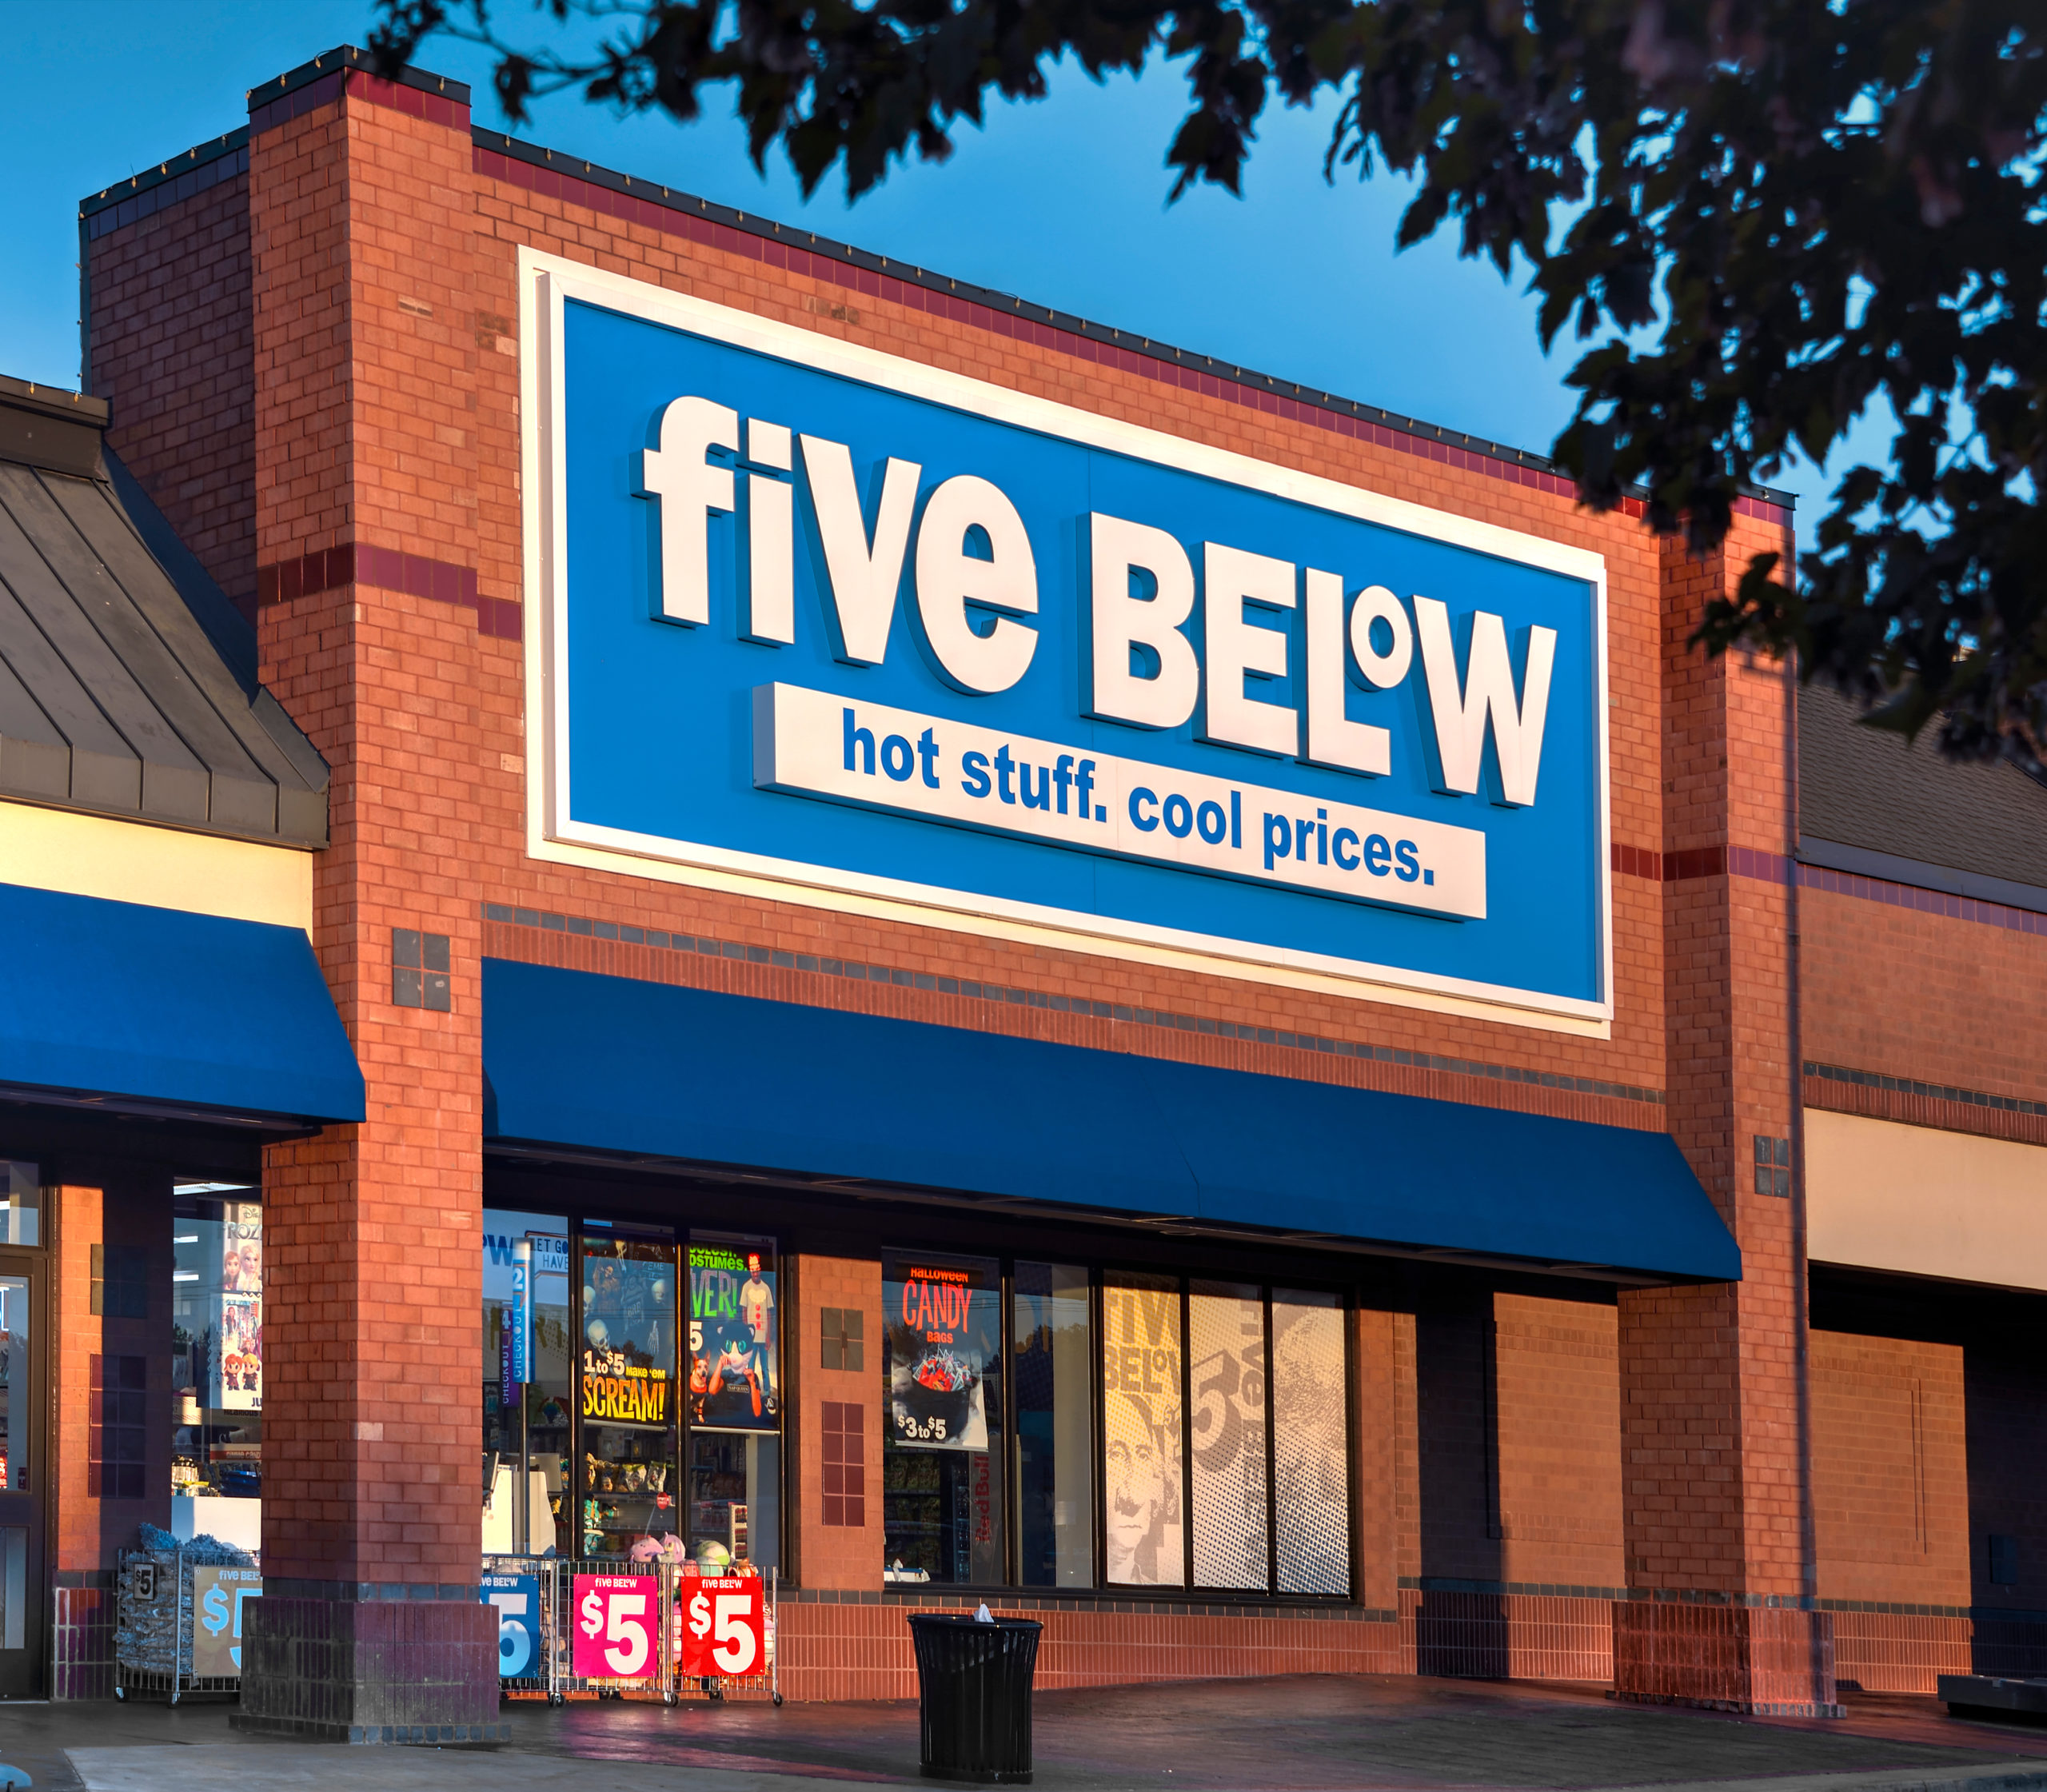 Five Below Joins Target, Walmart in Altering Self-Checkout Strategy